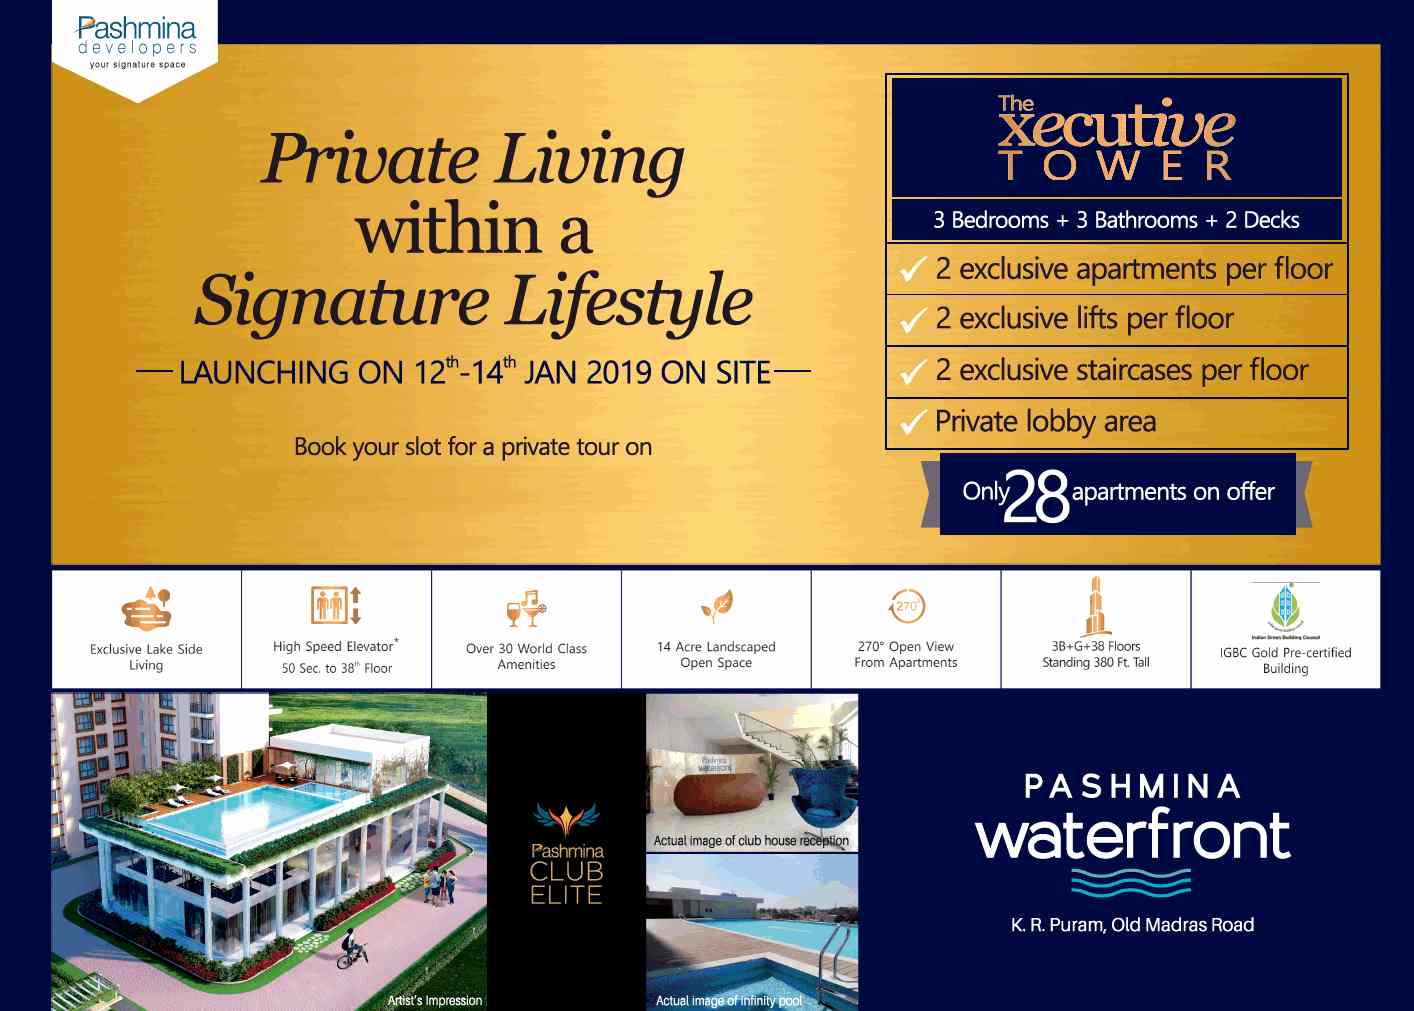 Experience private living within a signature lifestyle at Pashmina Waterfront in Bangalore Update